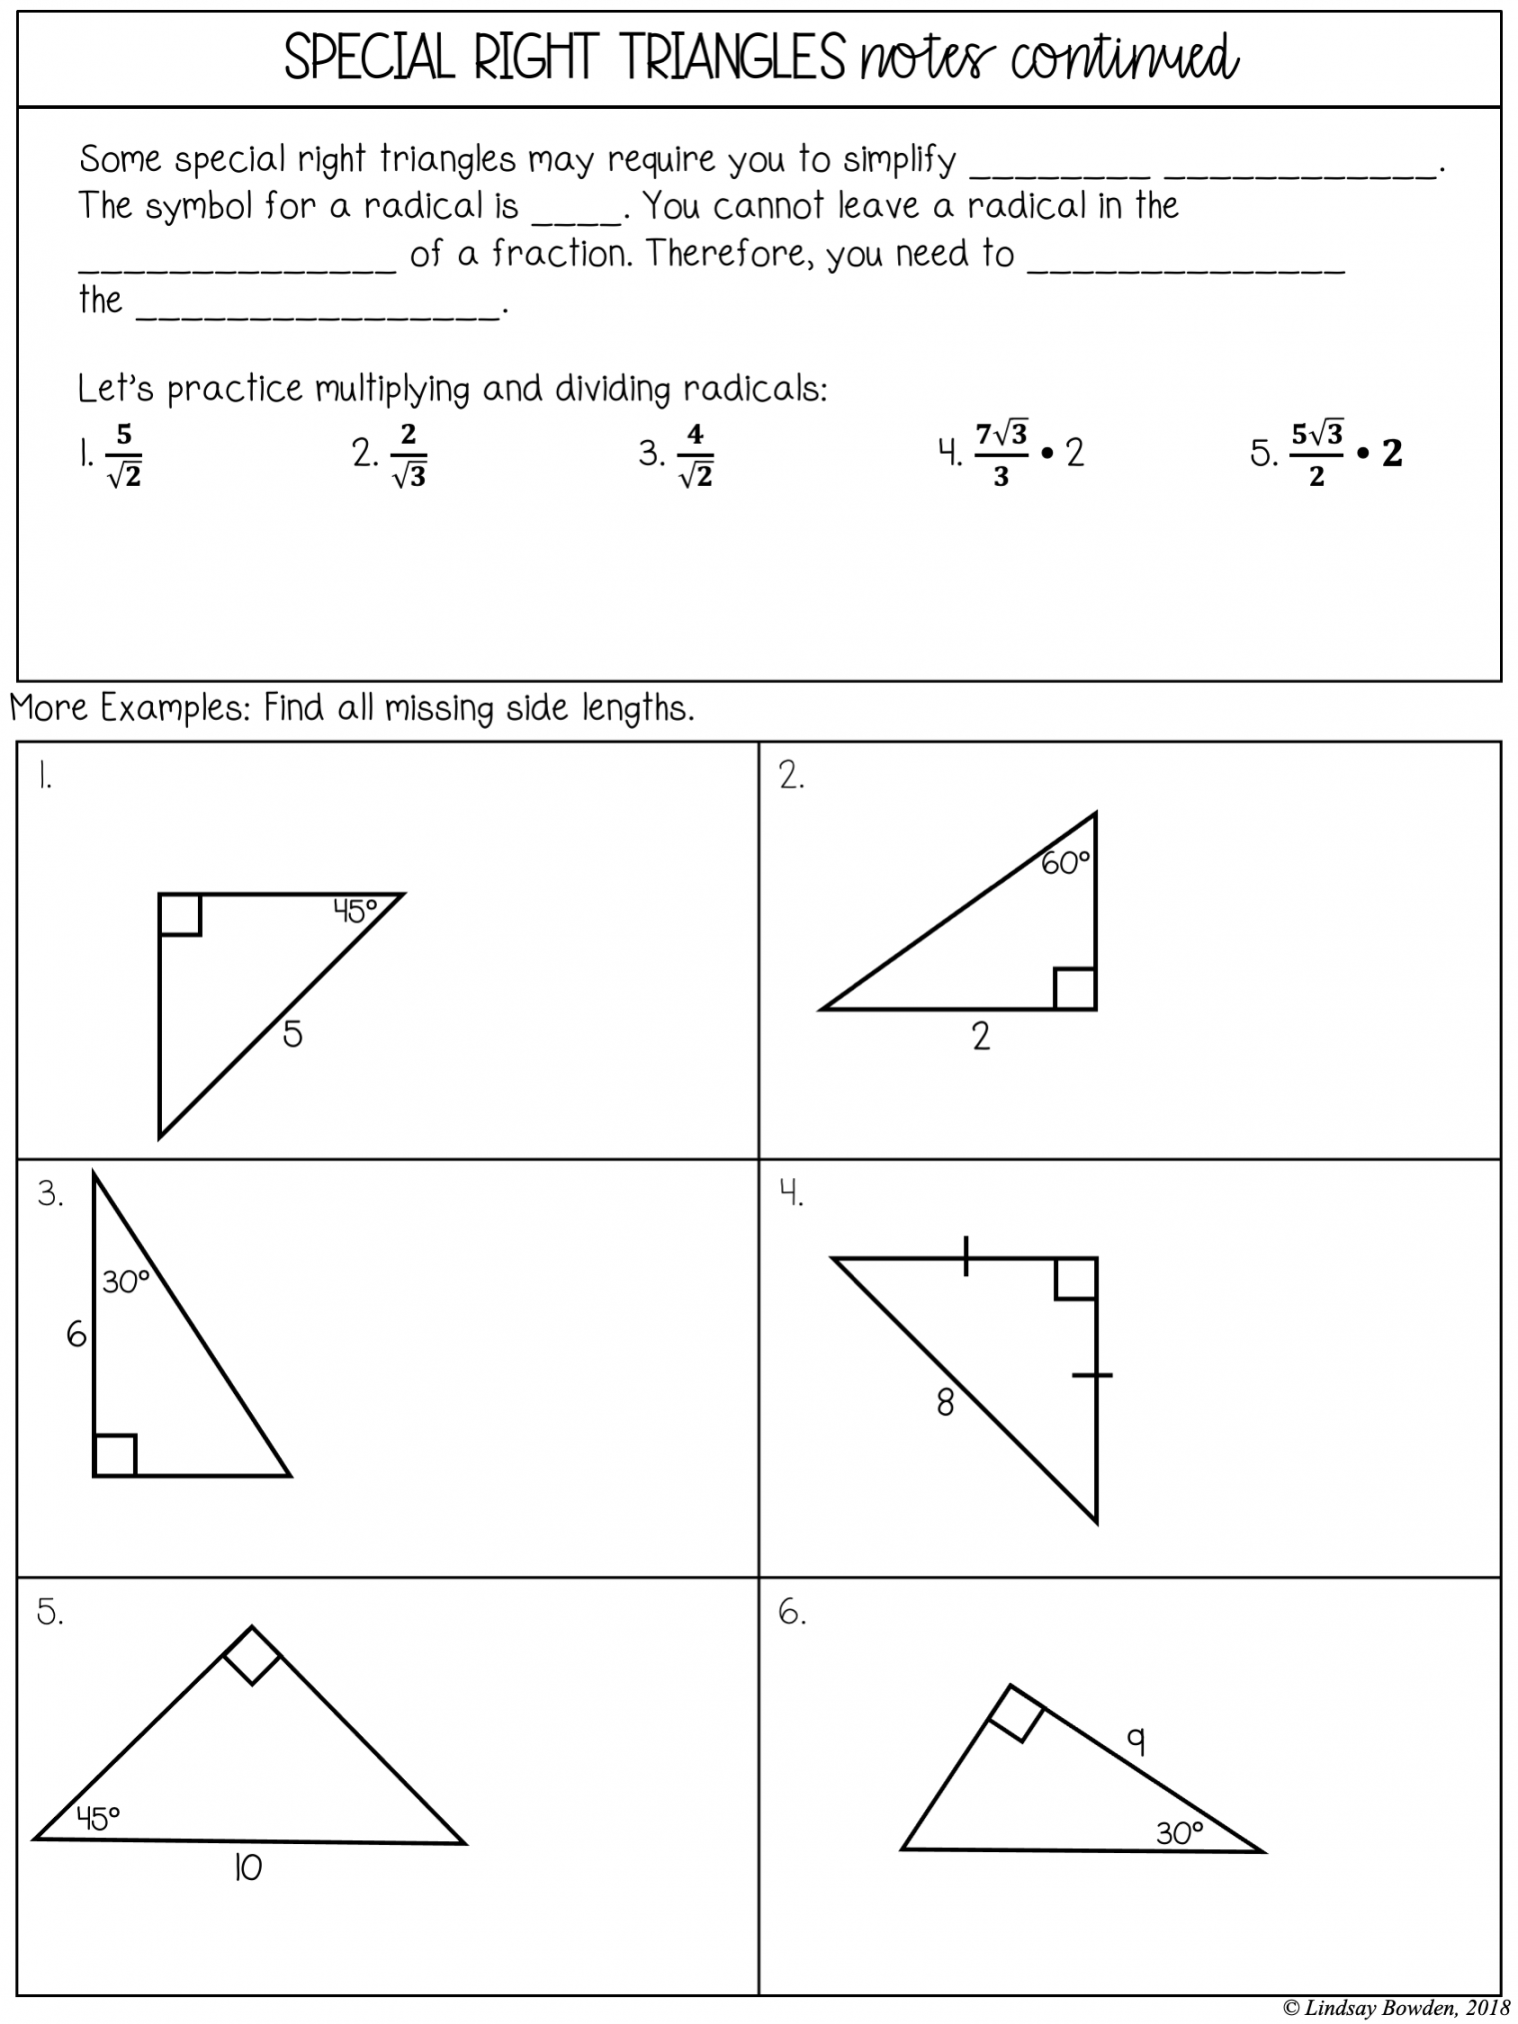 Special Right Triangles Notes and Worksheets - Lindsay Bowden